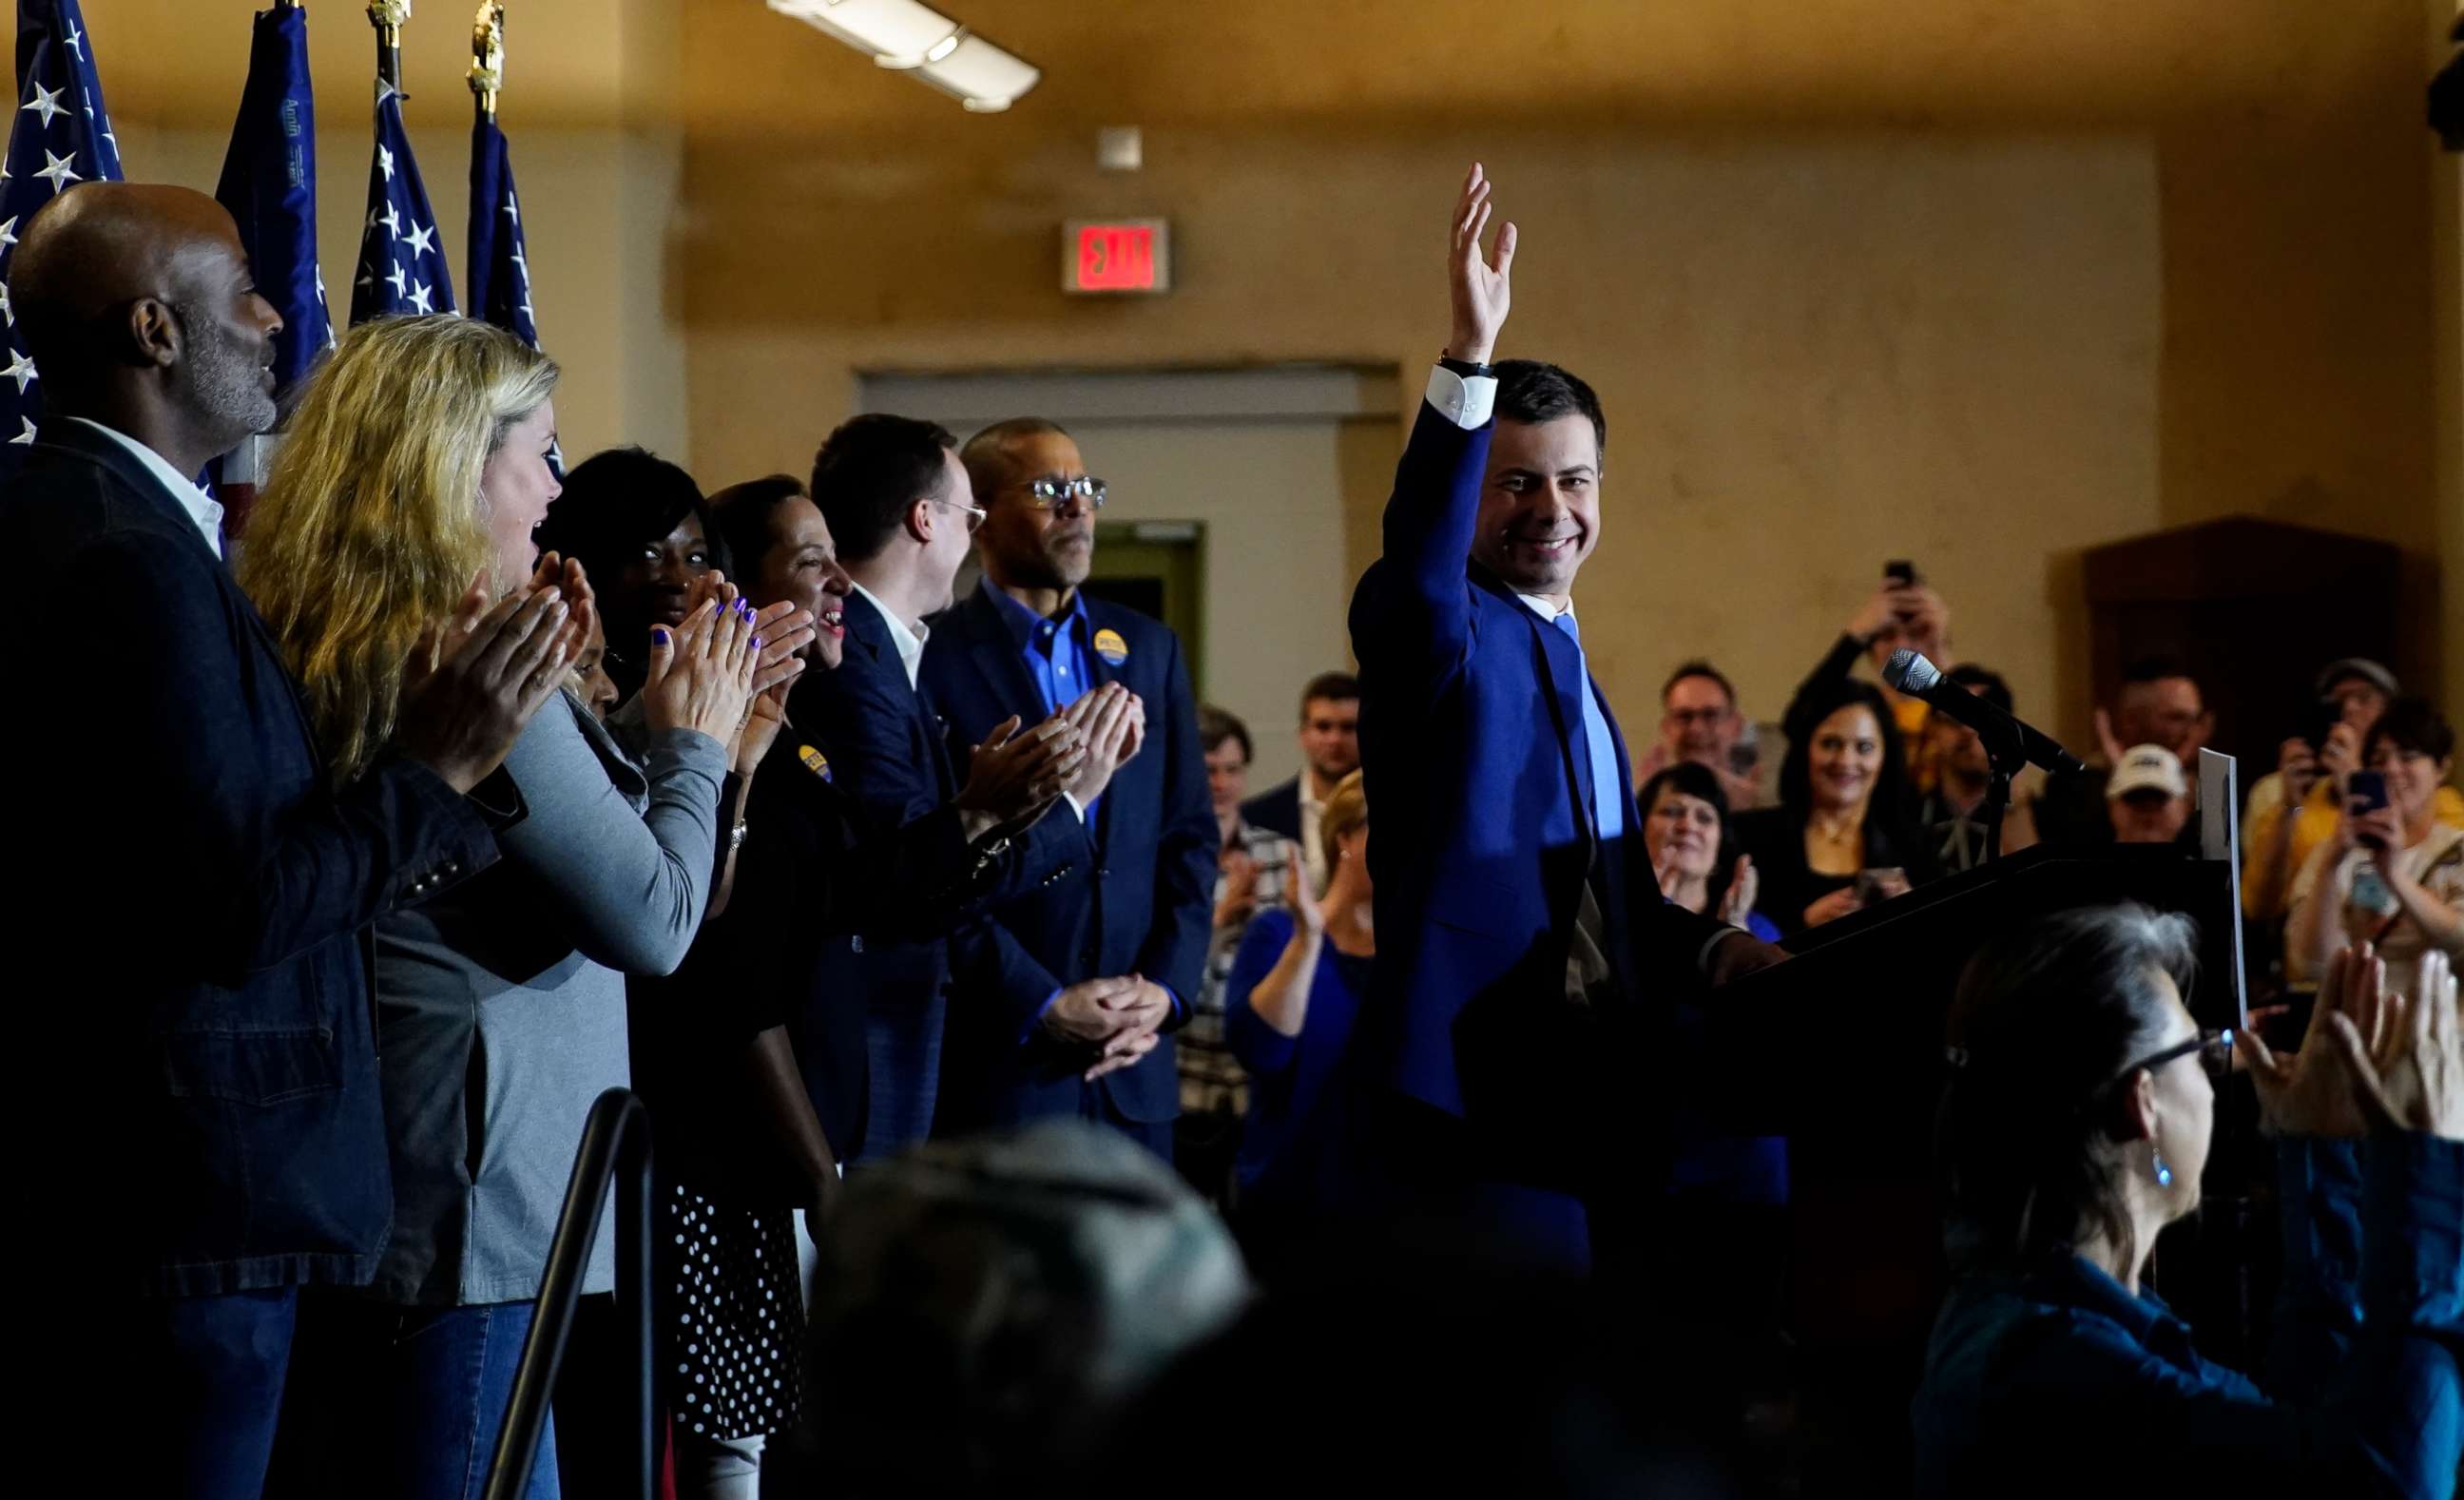 PHOTO: U.S. Democratic presidential candidate and former South Bend Mayor Pete Buttigieg speaks to supporters at his party after the Nevada Caucus in Las Vegas, Nevada, U.S. February 22, 2020.